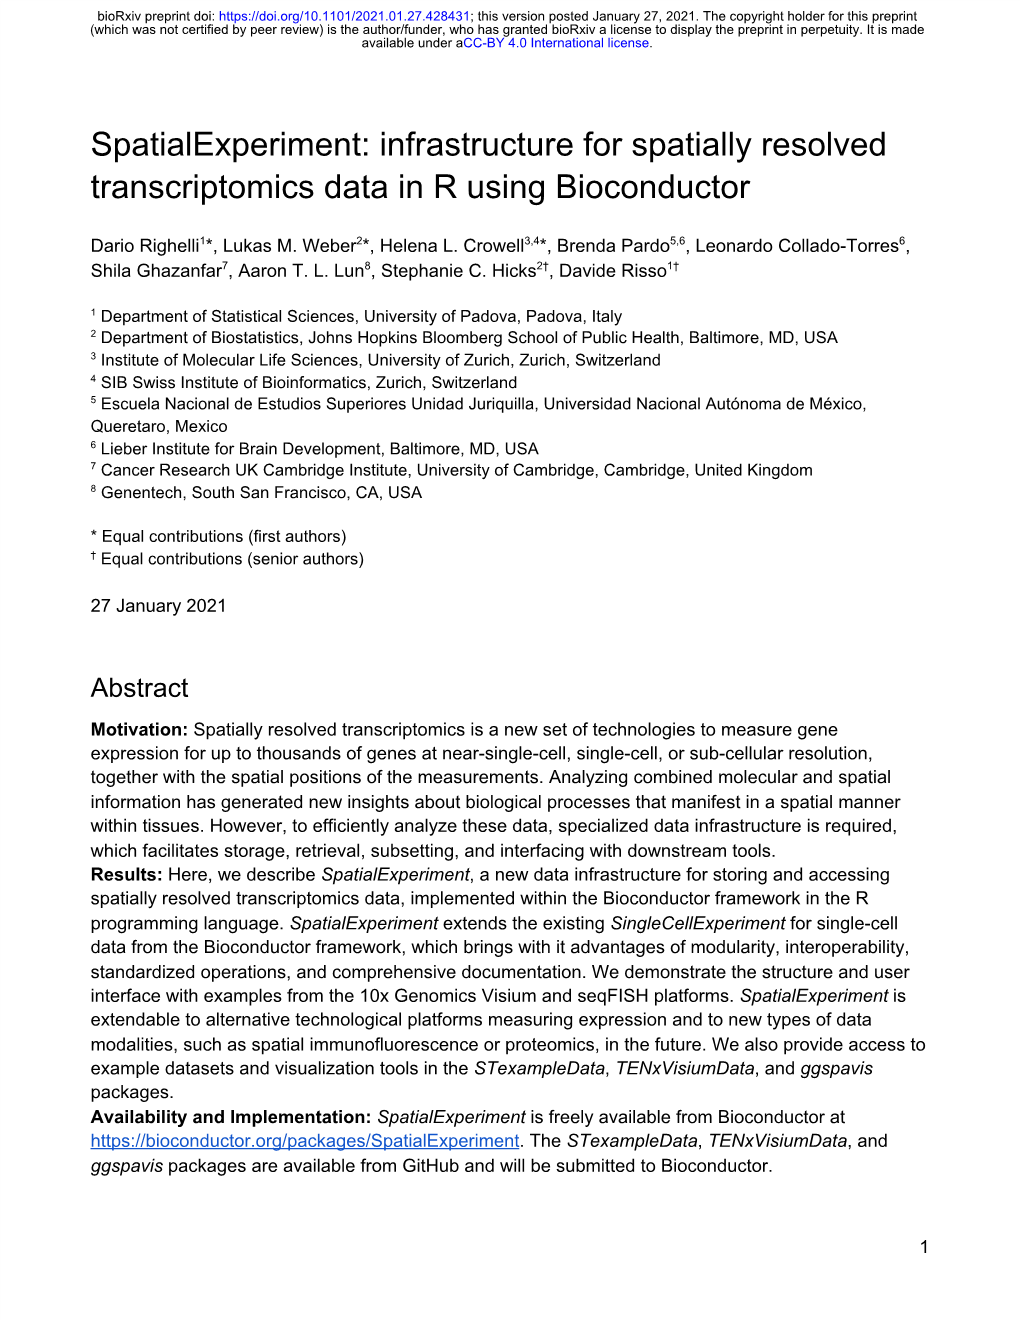 Infrastructure for Spatially Resolved Transcriptomics Data in R Using Bioconductor